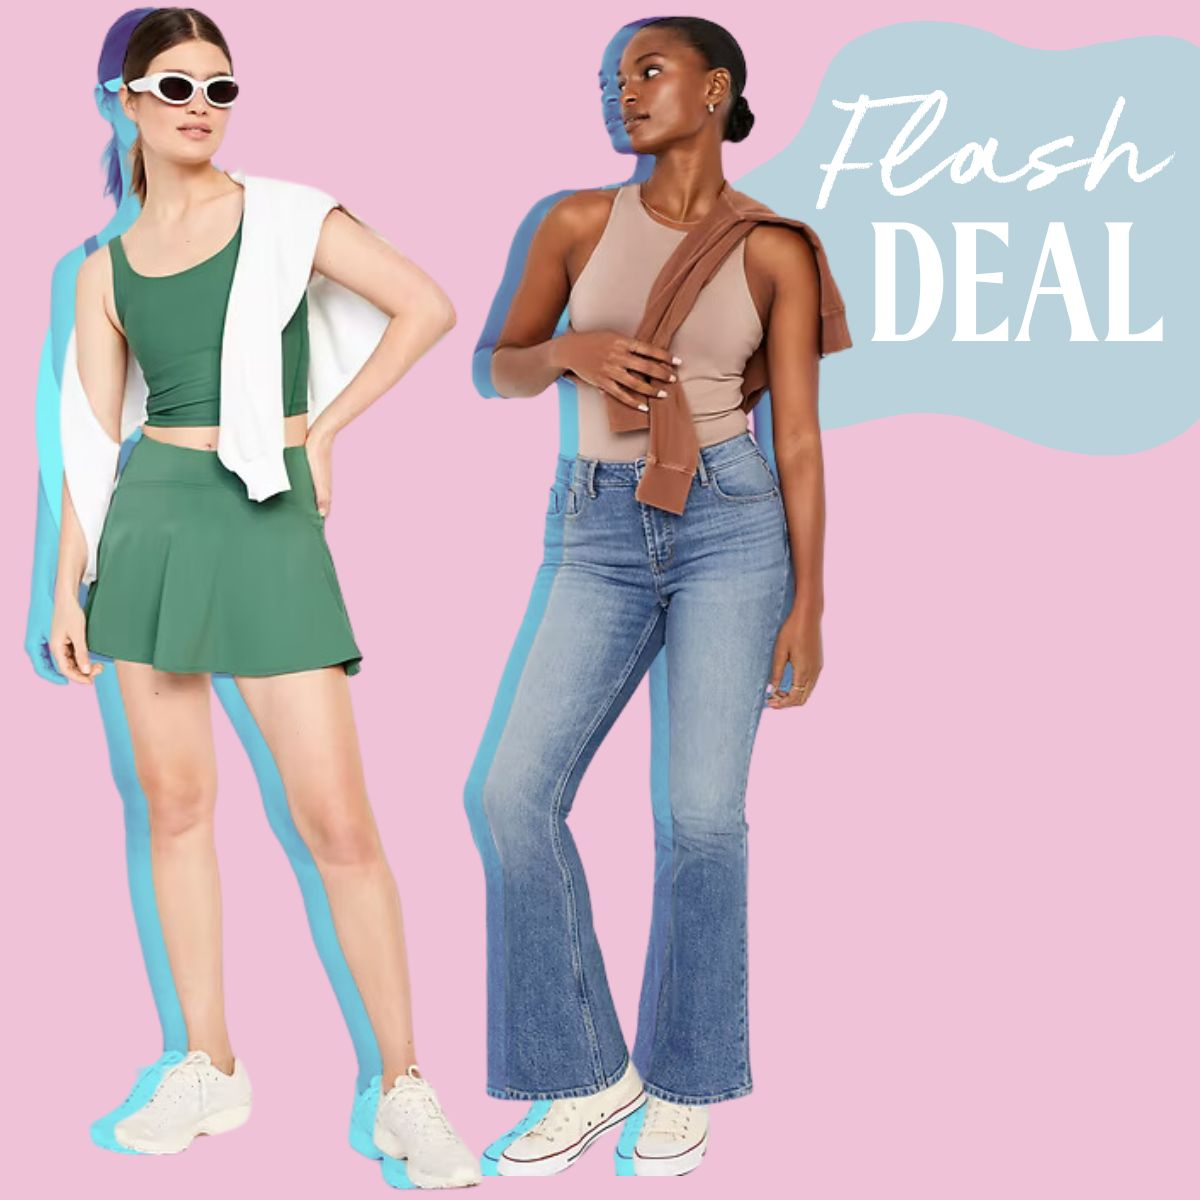 Old Navy’s Most Popular Items Are on Sale, Starting at $7